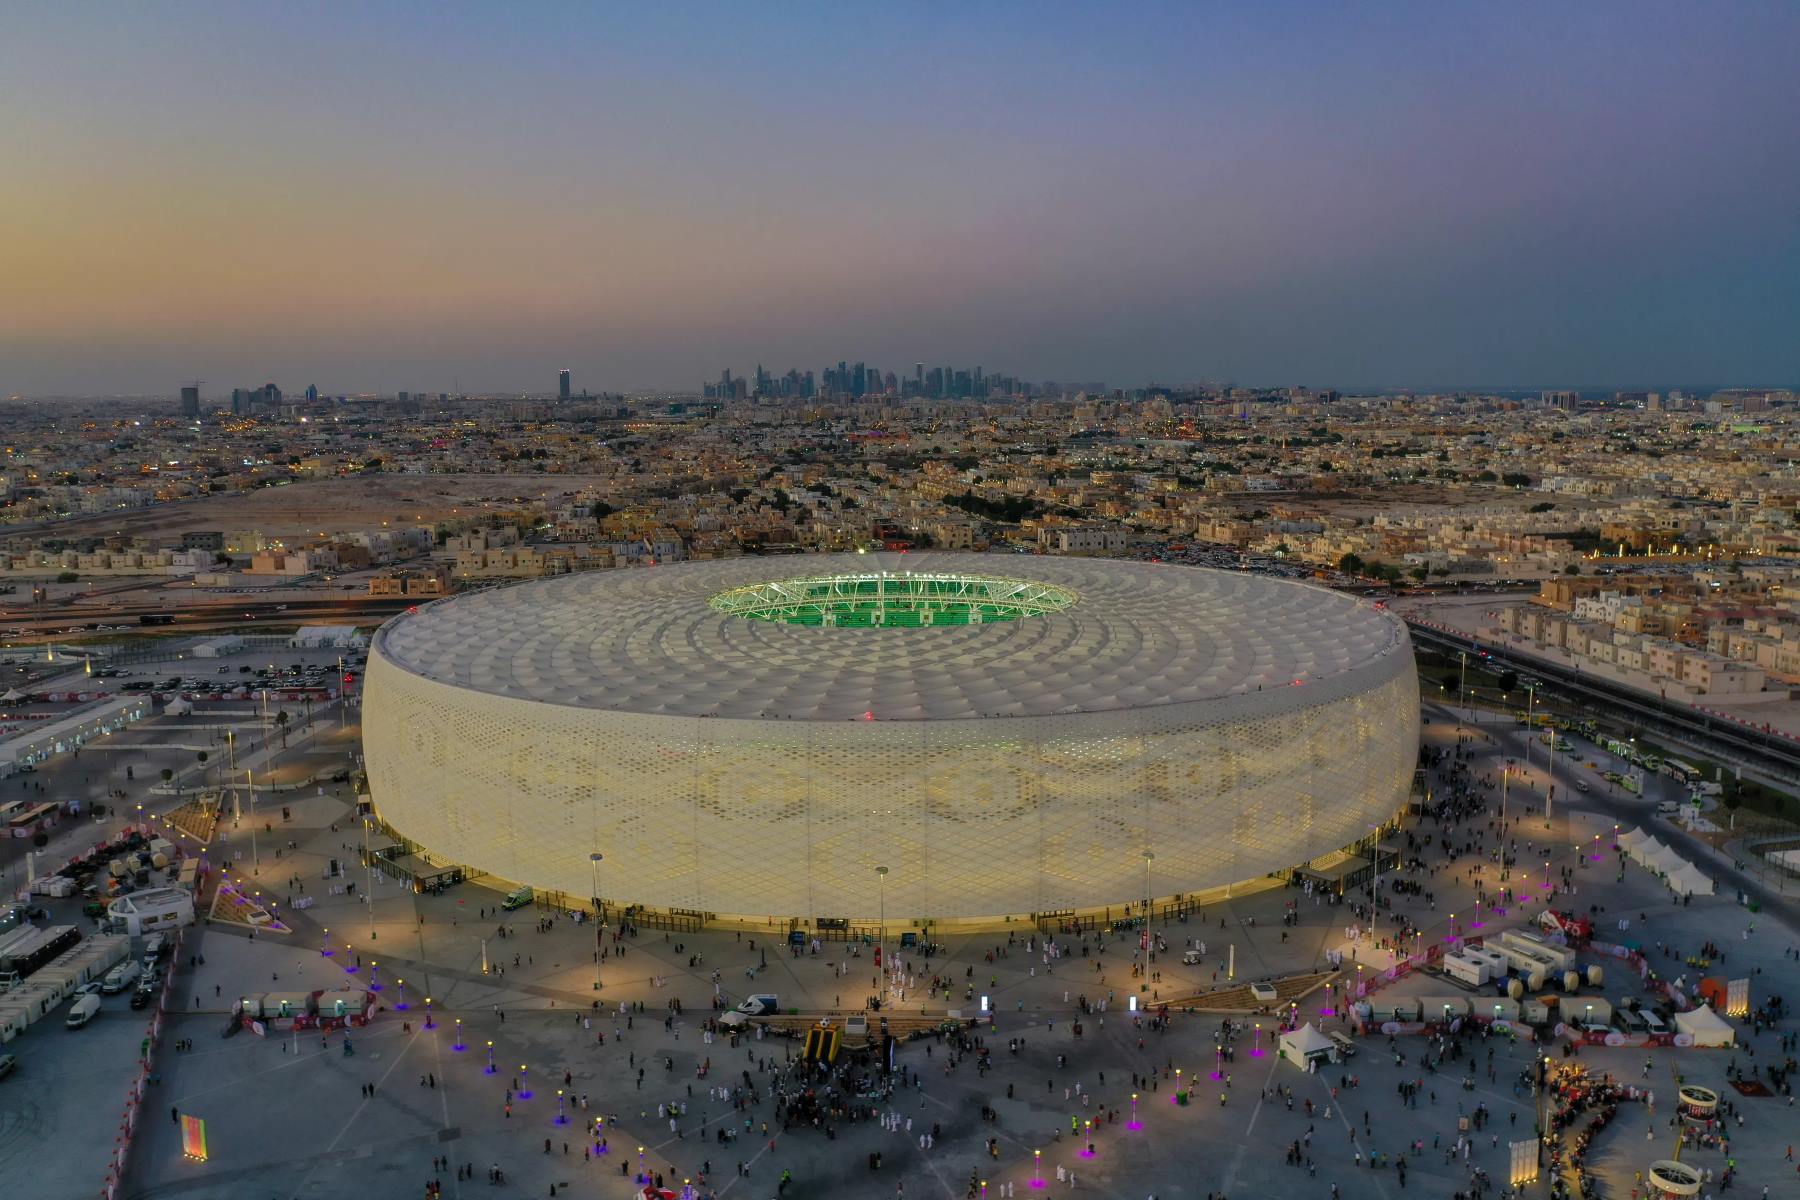 18-intriguing-facts-about-al-thumama-stadium